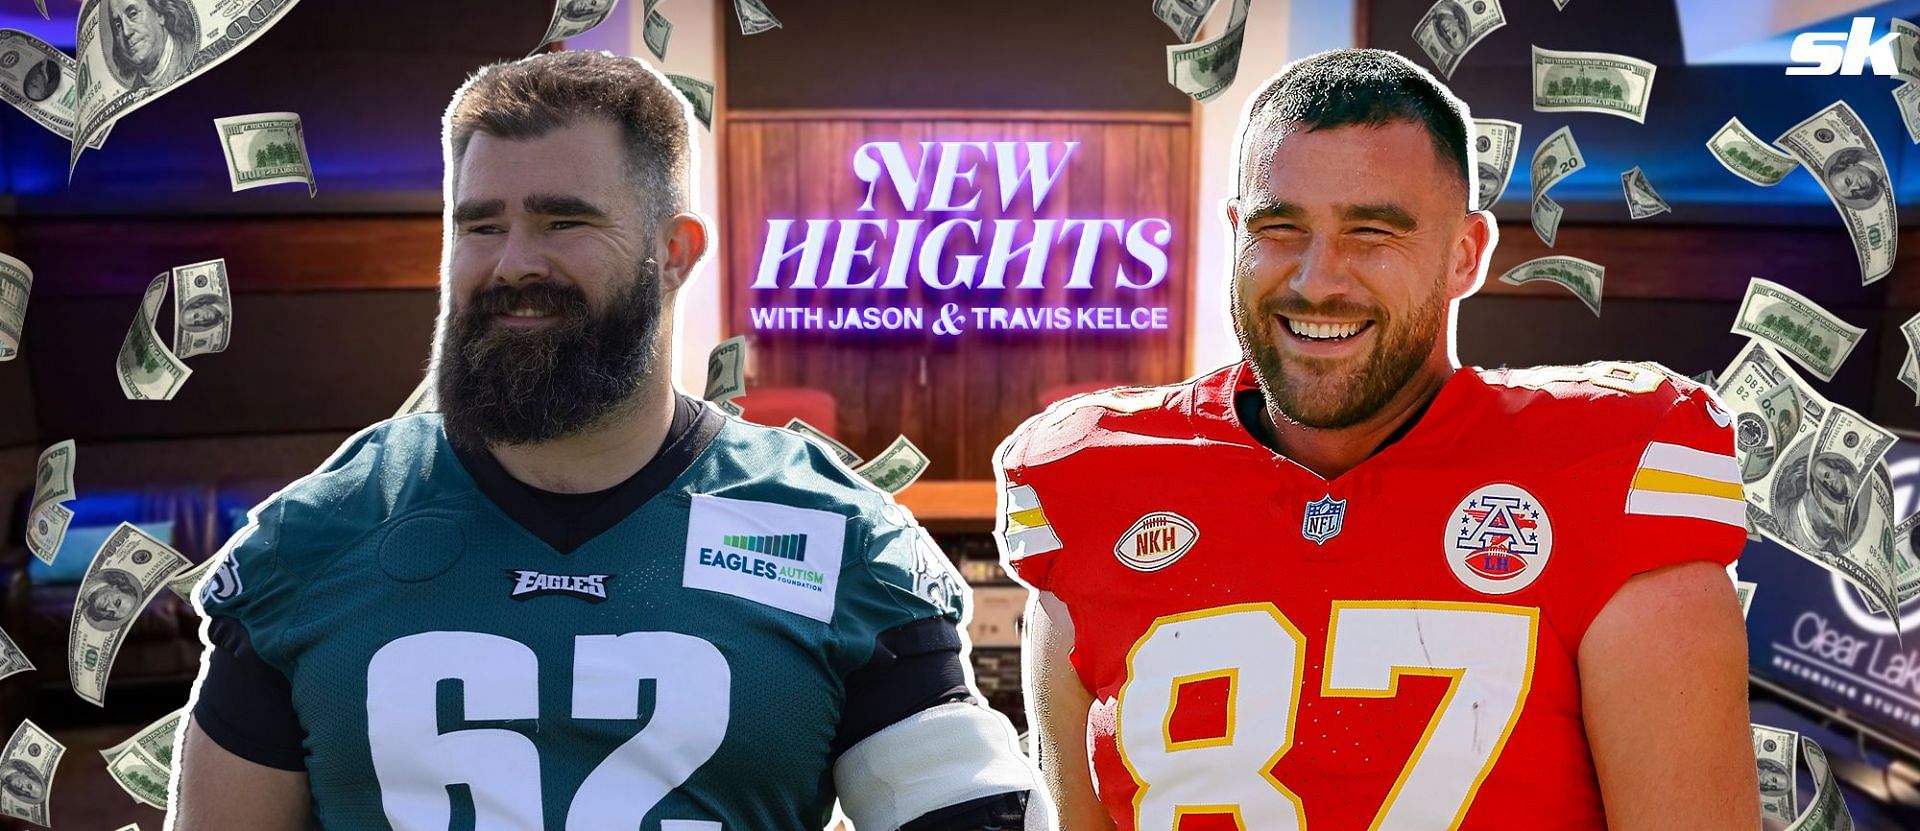 Jason and Travis Kelce set to become rich from their podcast New Heights